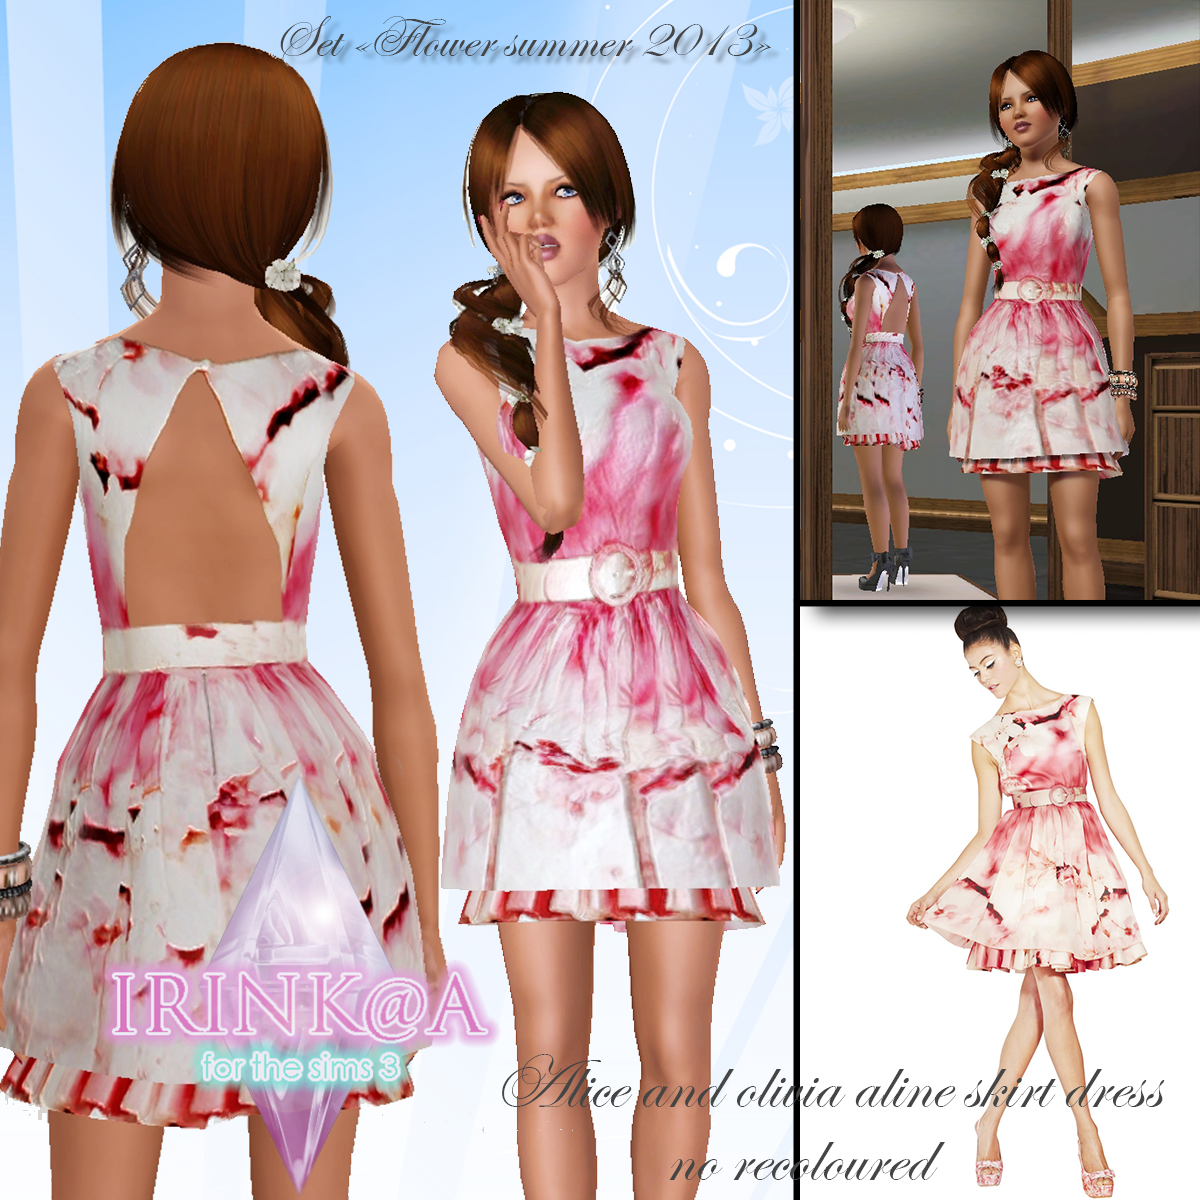 My Sims 3 Blog: New Dresses by irink@a